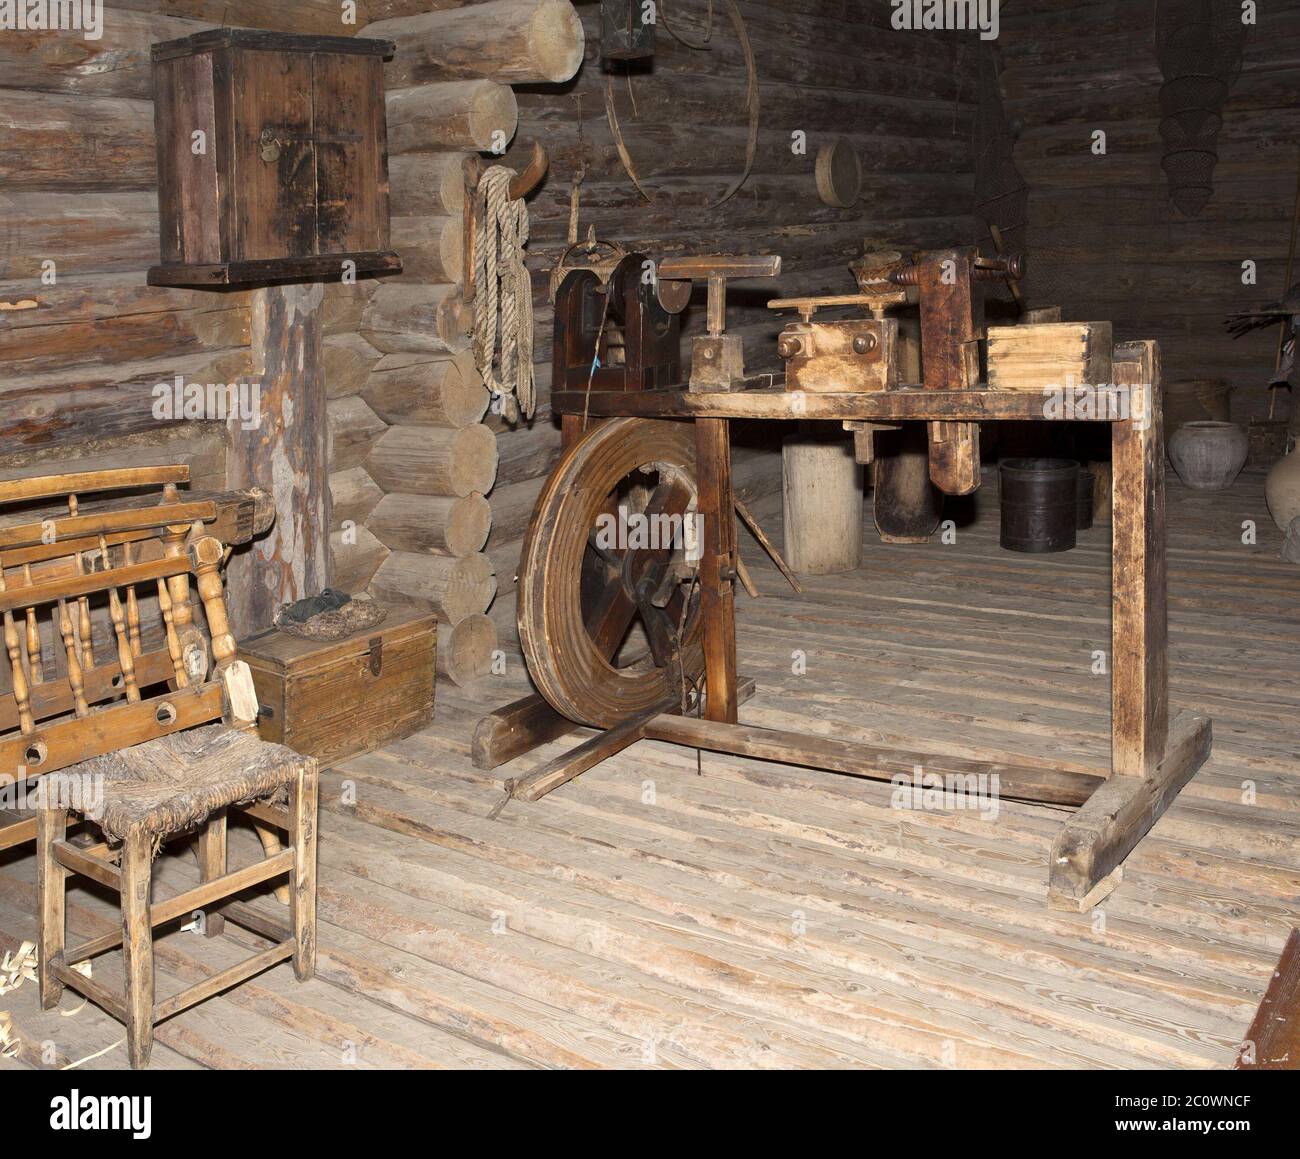 ancient interior of the room of the weaver in a wooden log hut, Russia Stock Photo